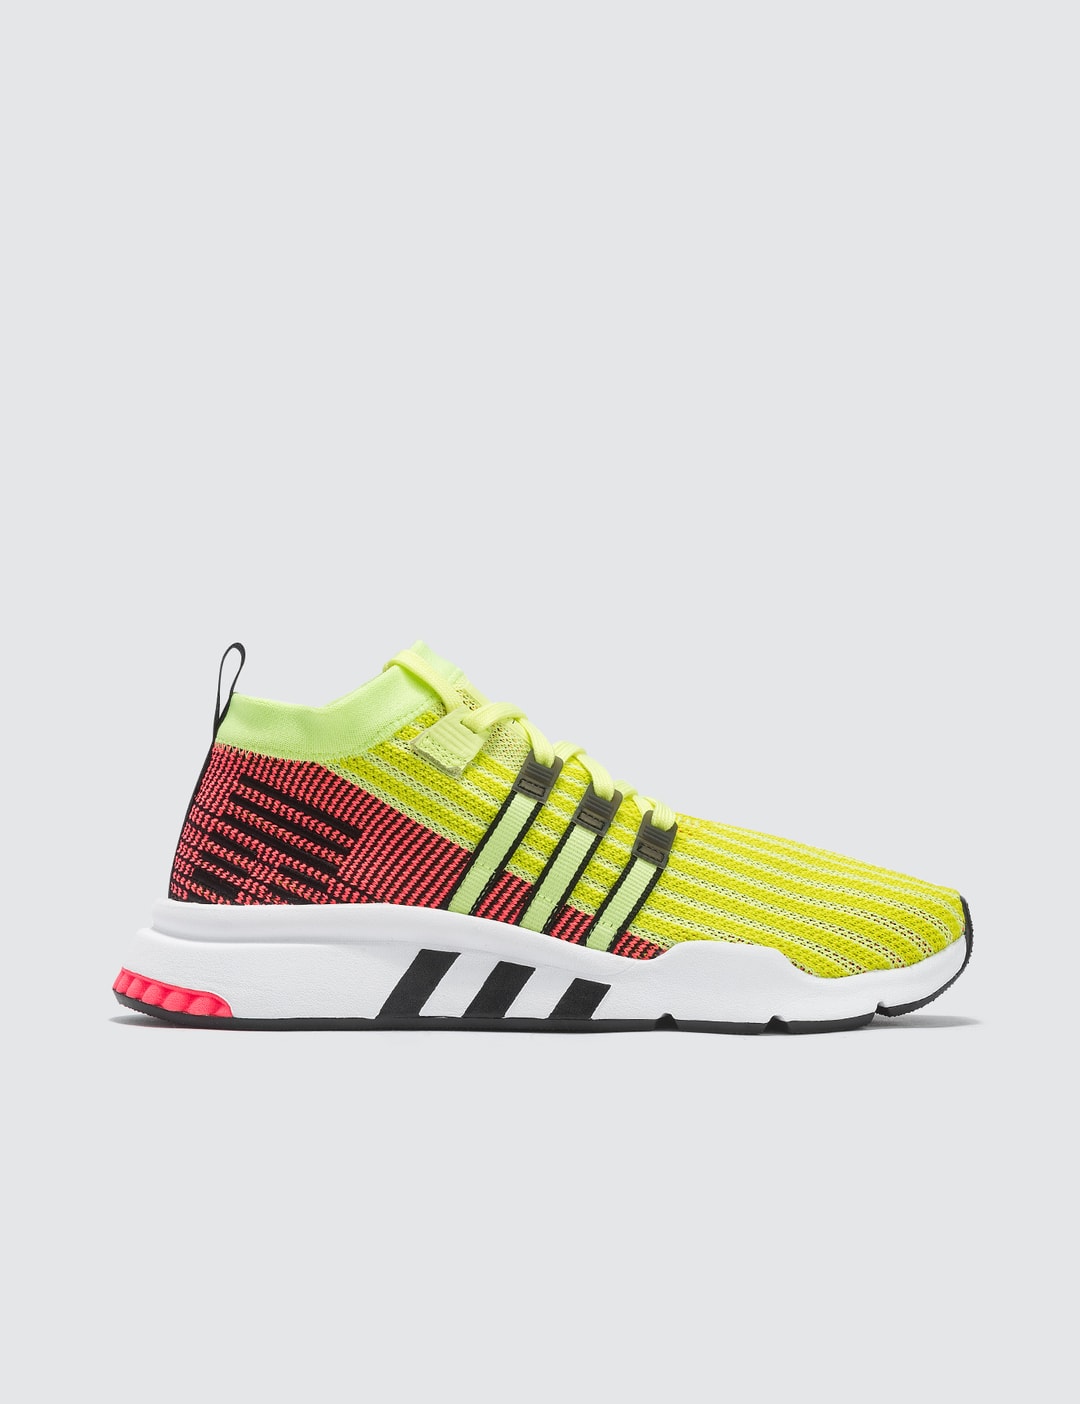 Adidas Originals - EQT Support Mid Adv | HBX - Globally Curated Fashion and Lifestyle